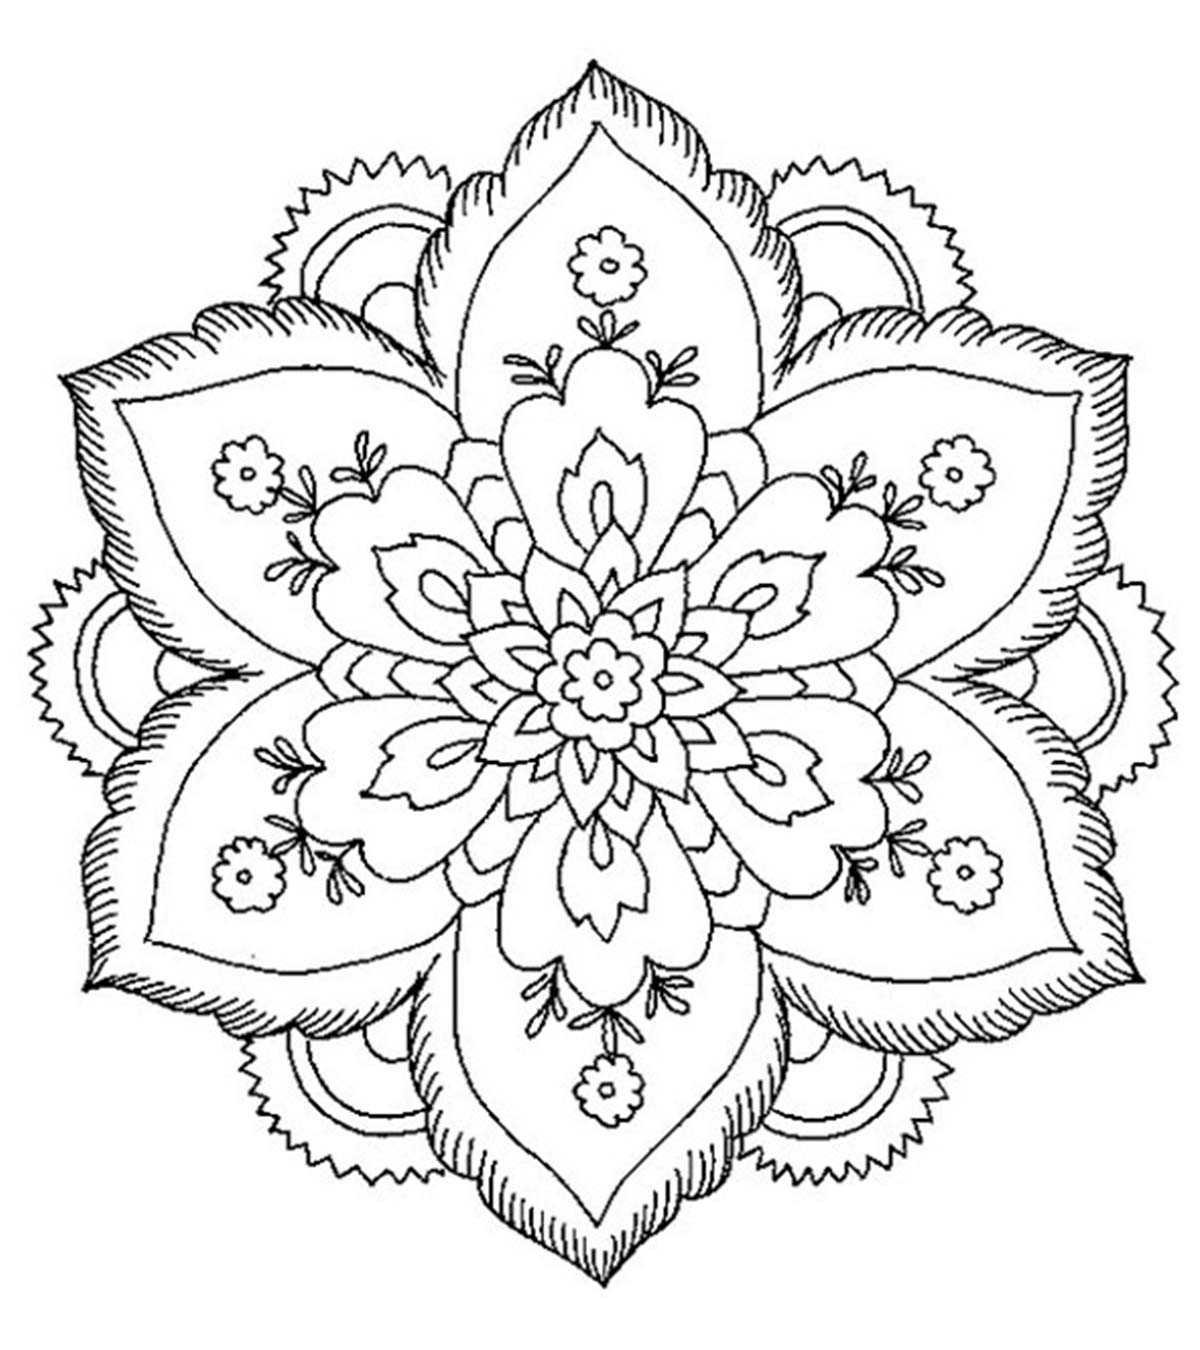 pattern-coloring-pages-momjunction